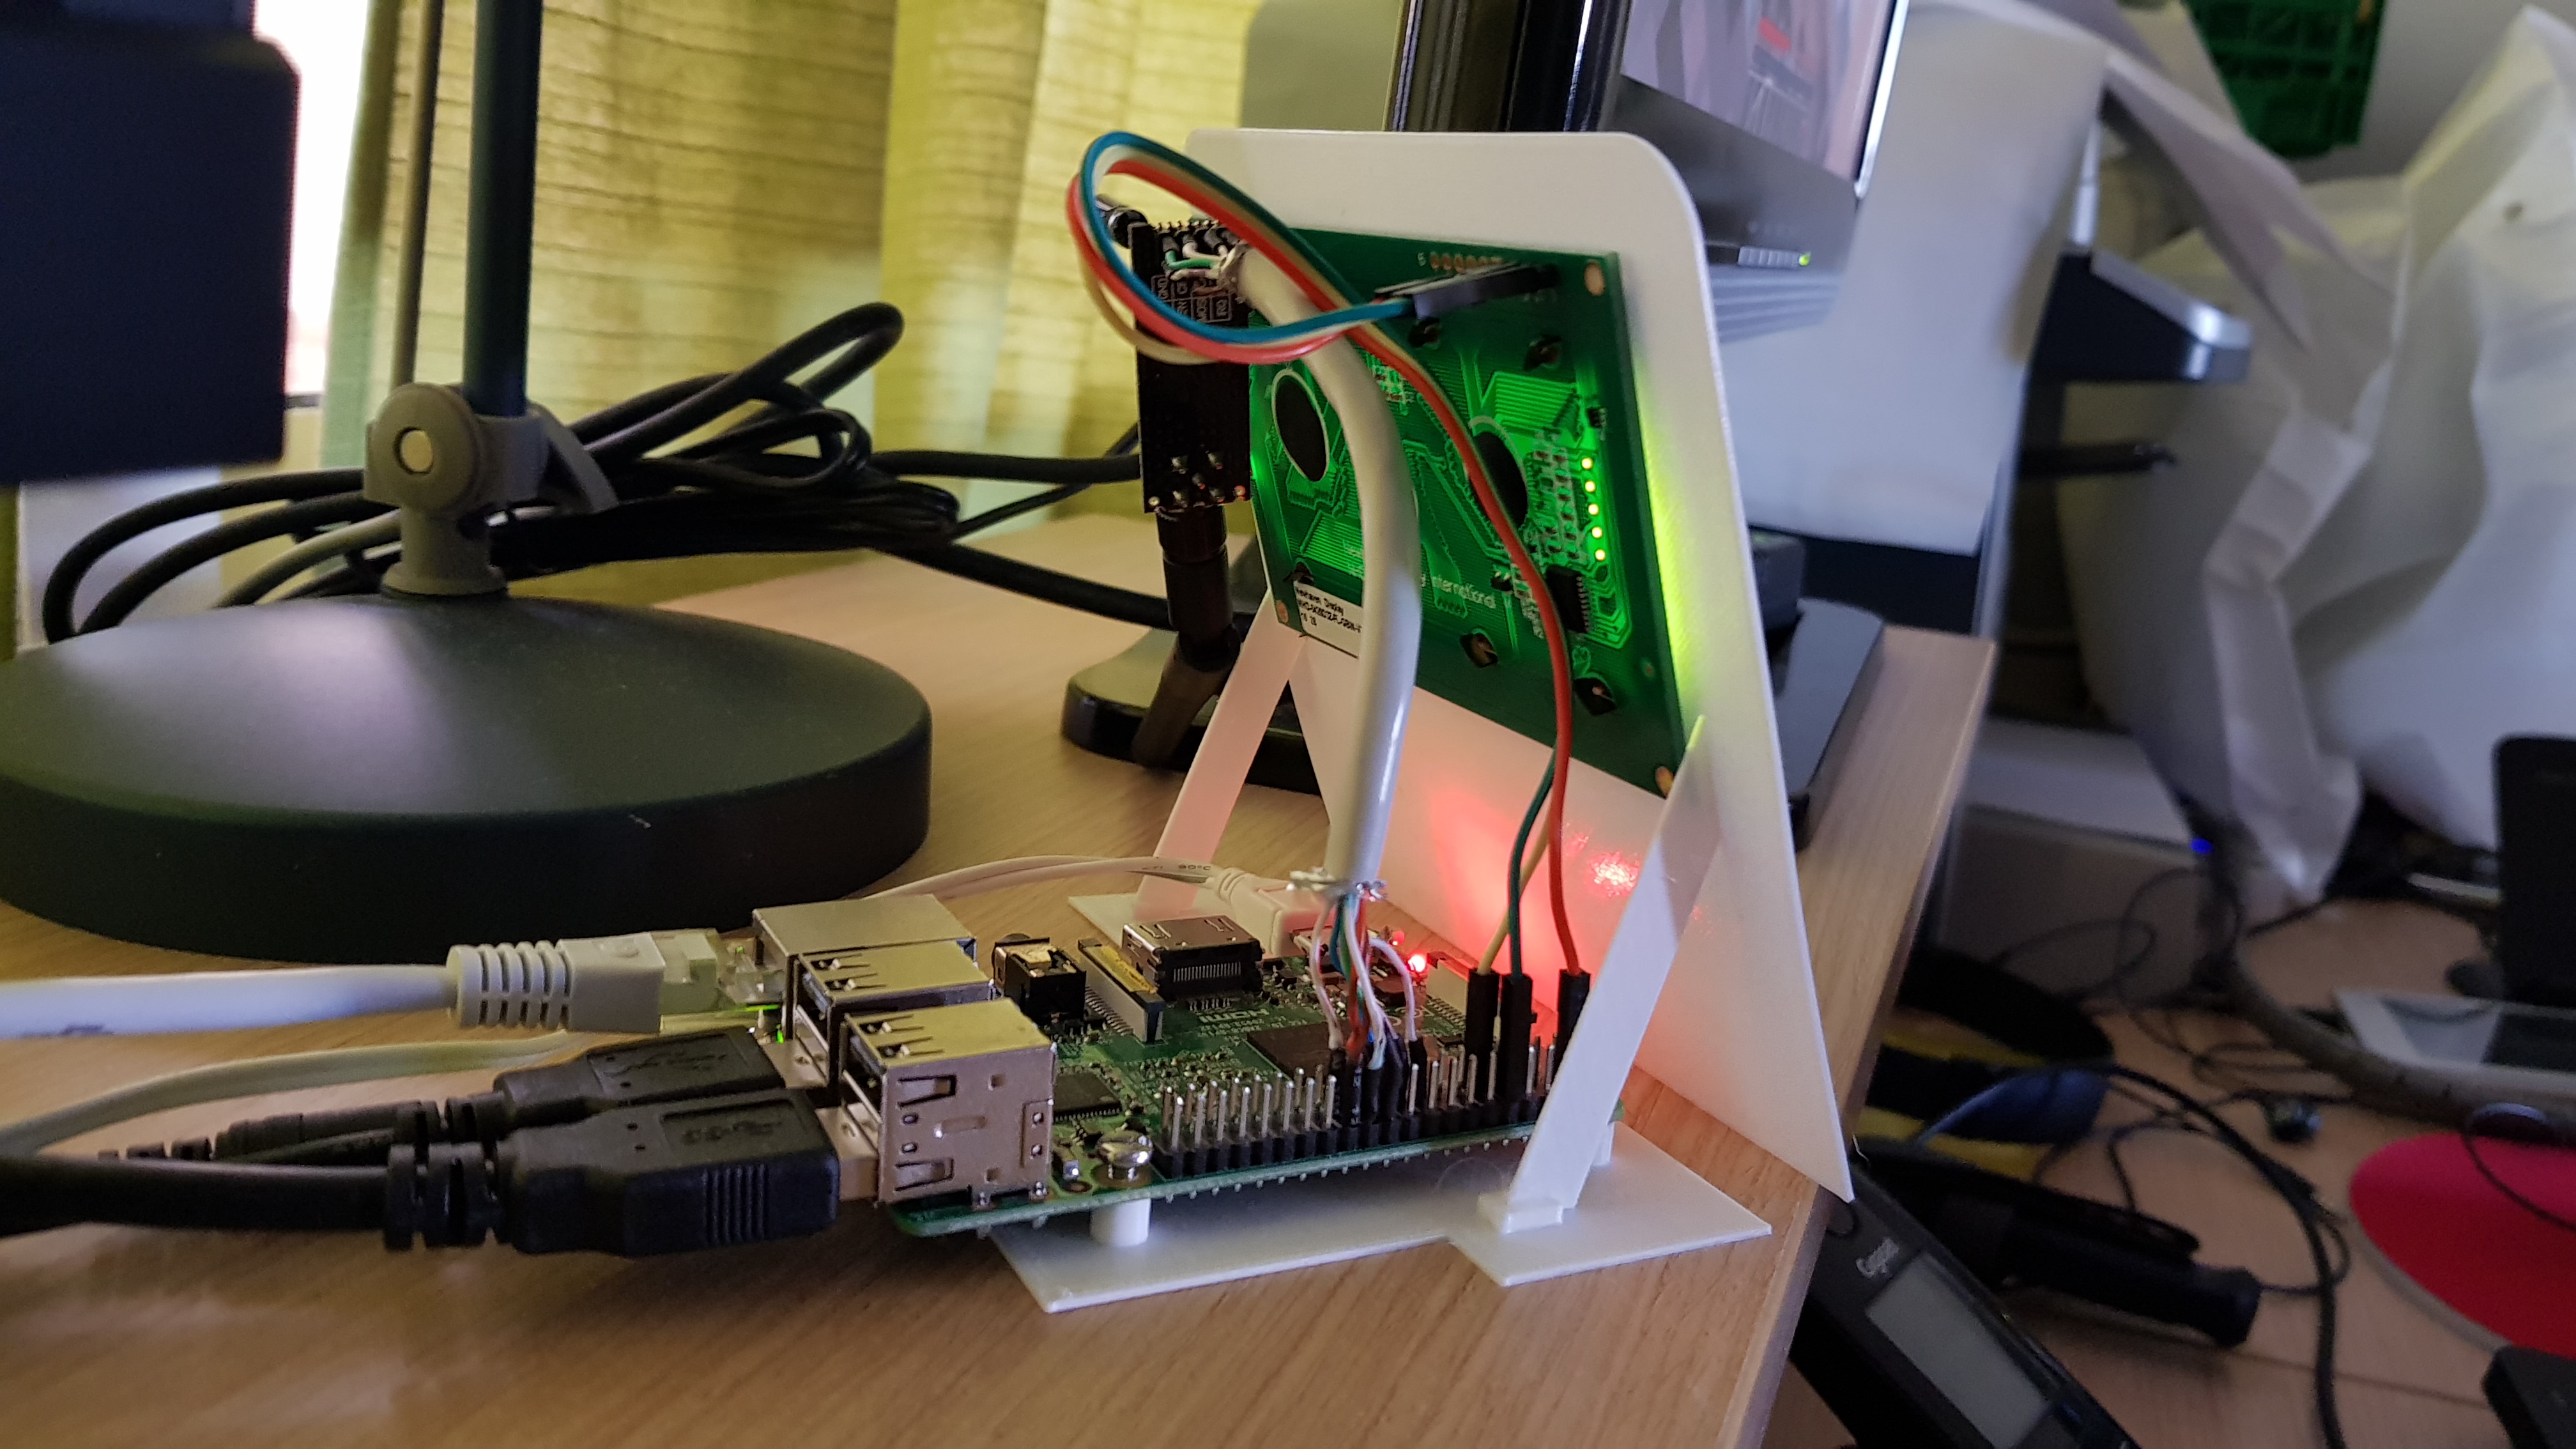 RaspberryPI with a serial display